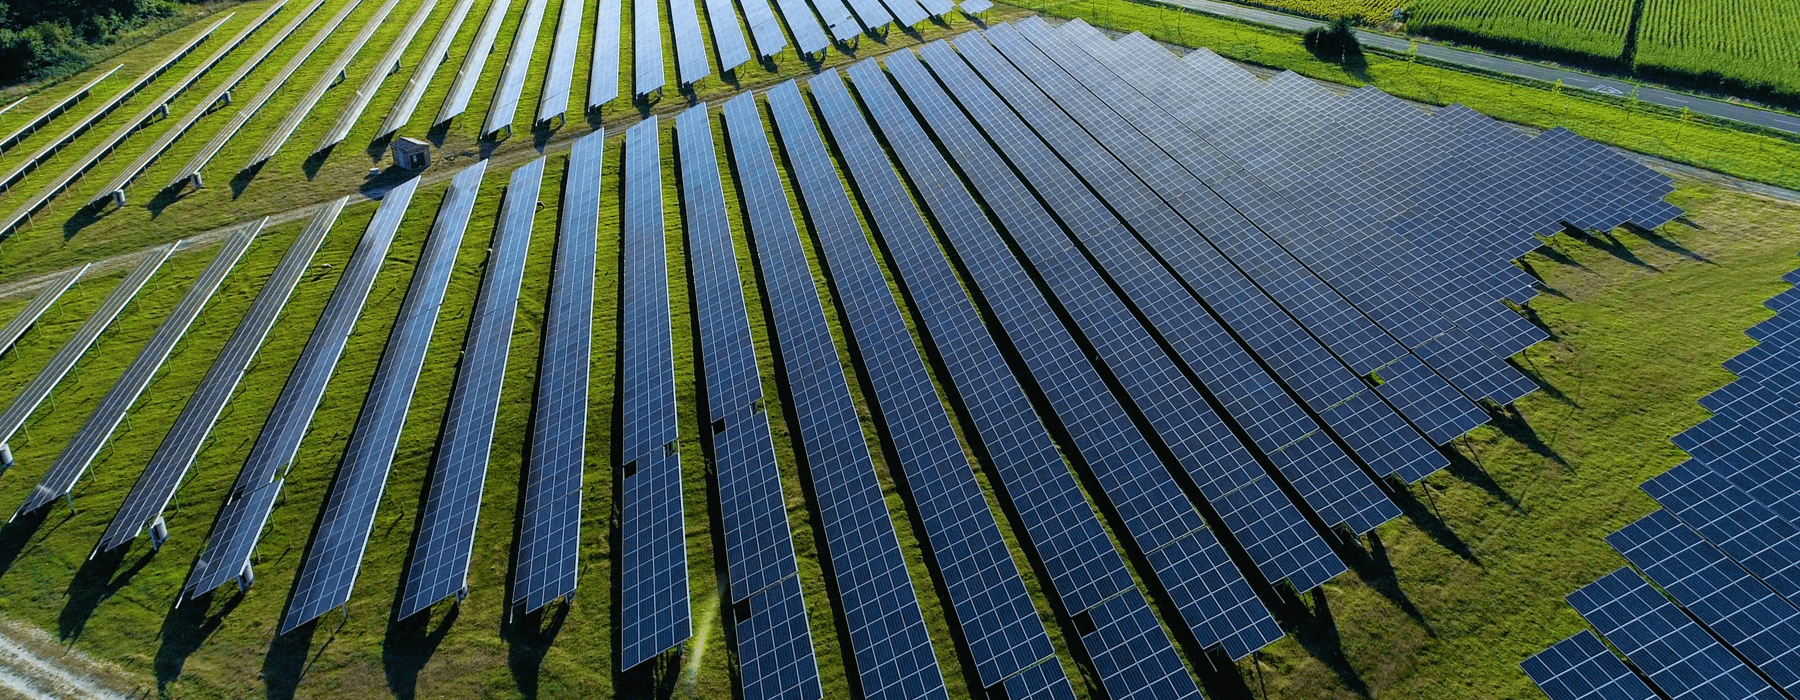 How the US Could Reach the 40% Solar Power Target by 2035